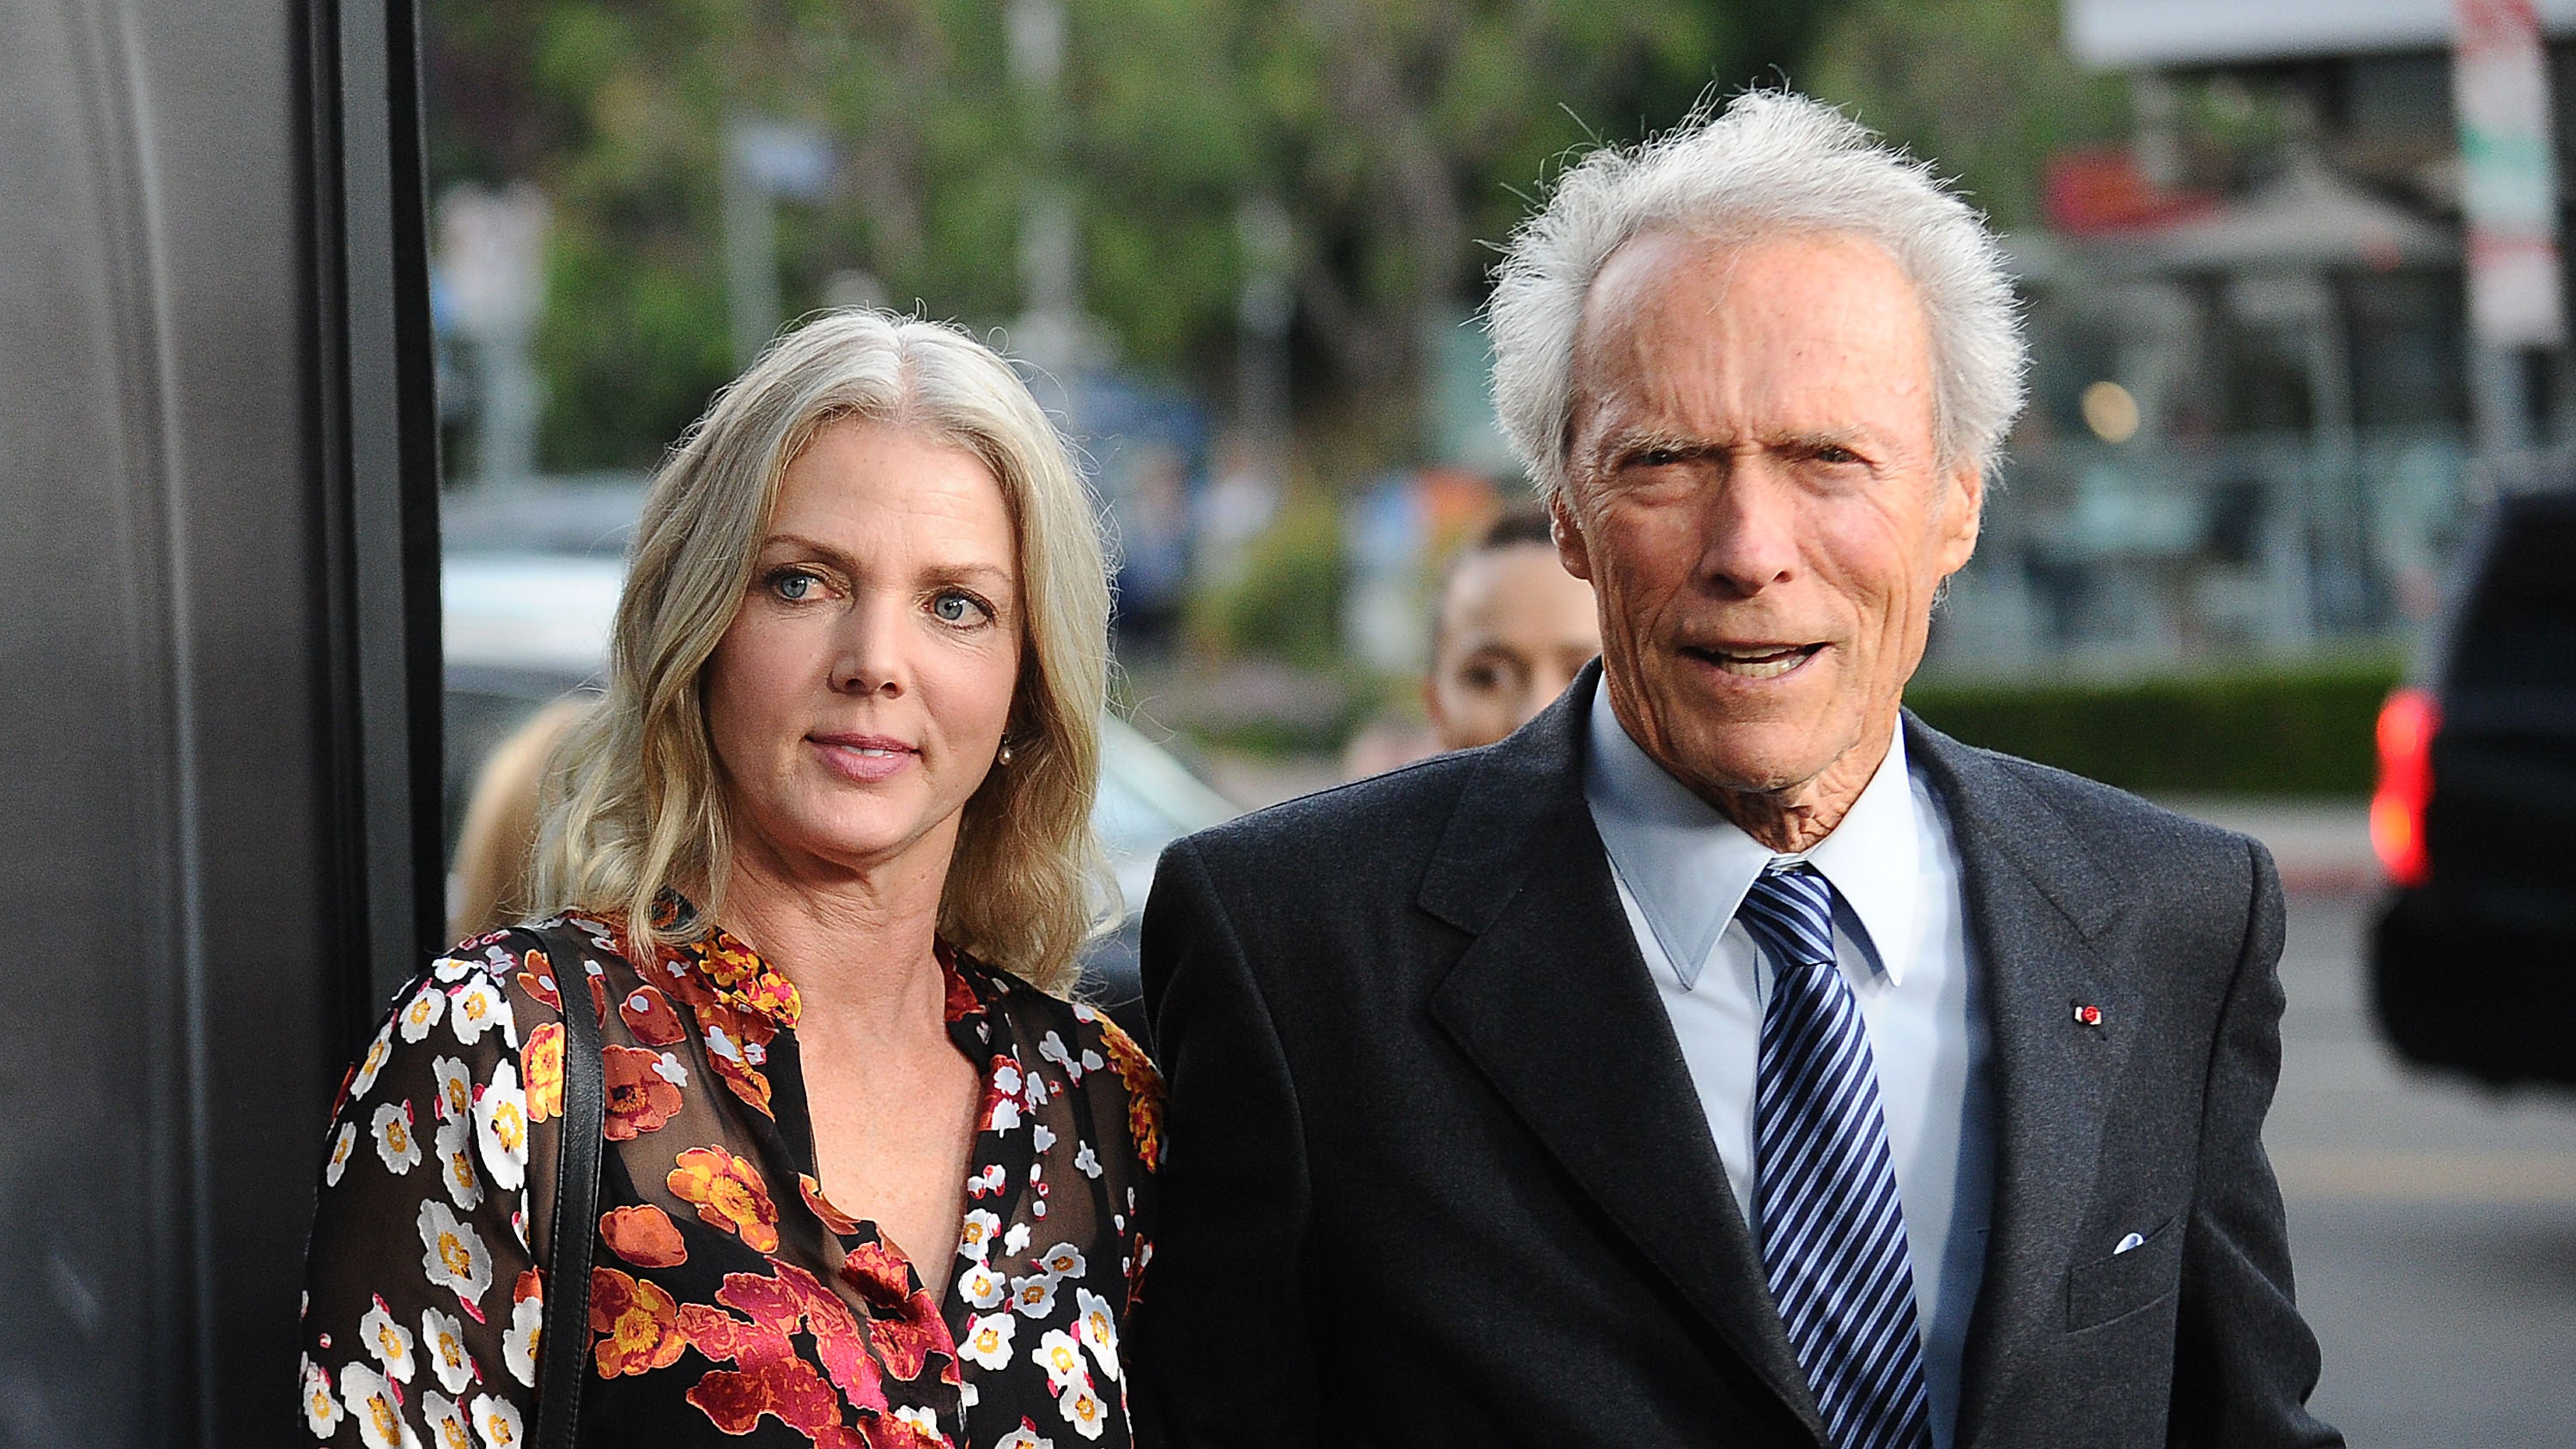 Clint Eastwood, 90, grateful for his large 'close' family, says insider